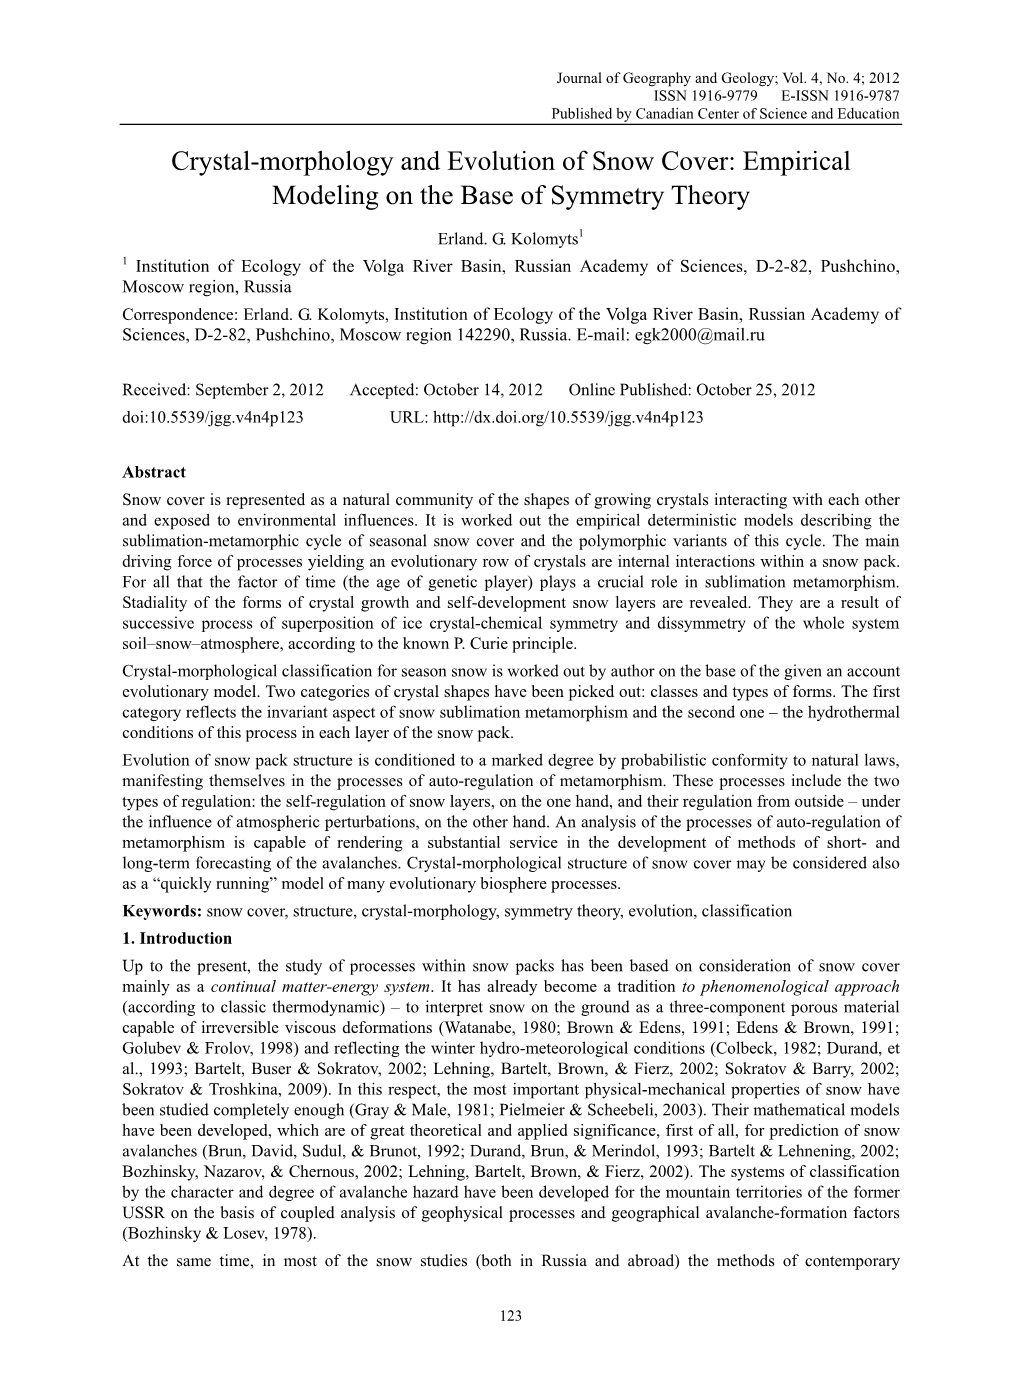 Crystal-Morphology and Evolution of Snow Cover: Empirical Modeling on the Base of Symmetry Theory